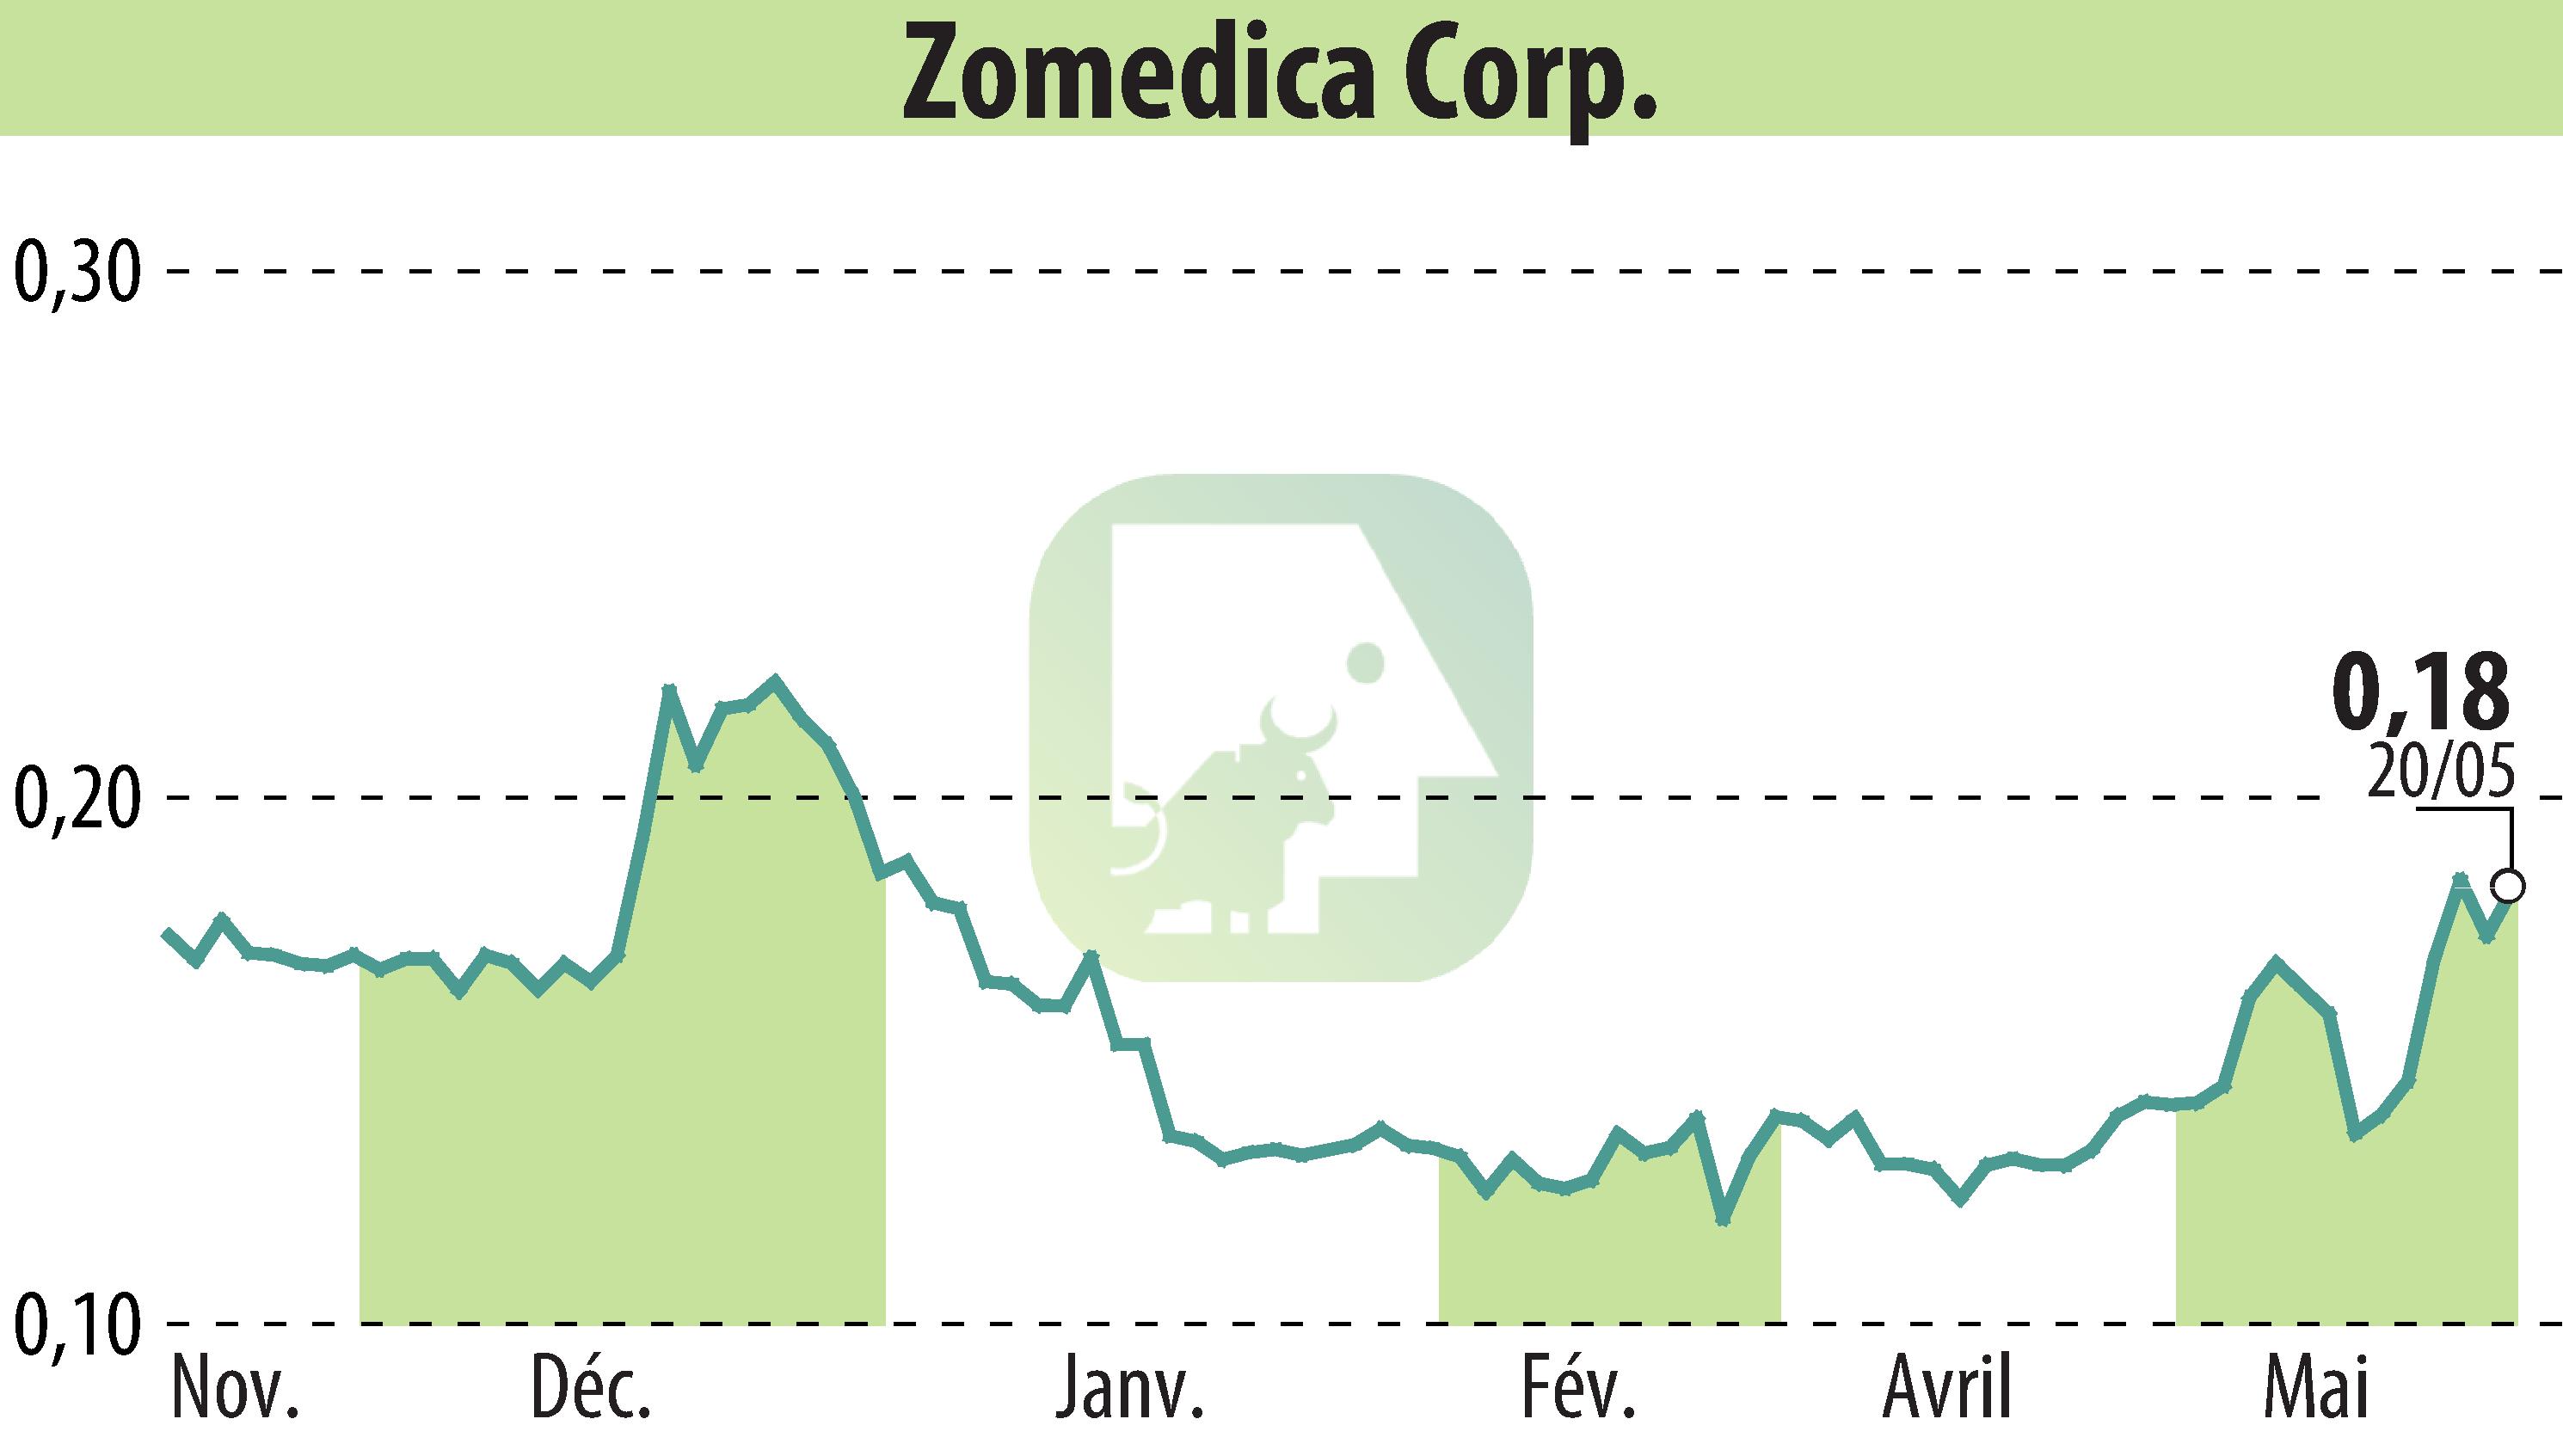 Stock price chart of Zomedica Corp. (EBR:ZOM) showing fluctuations.